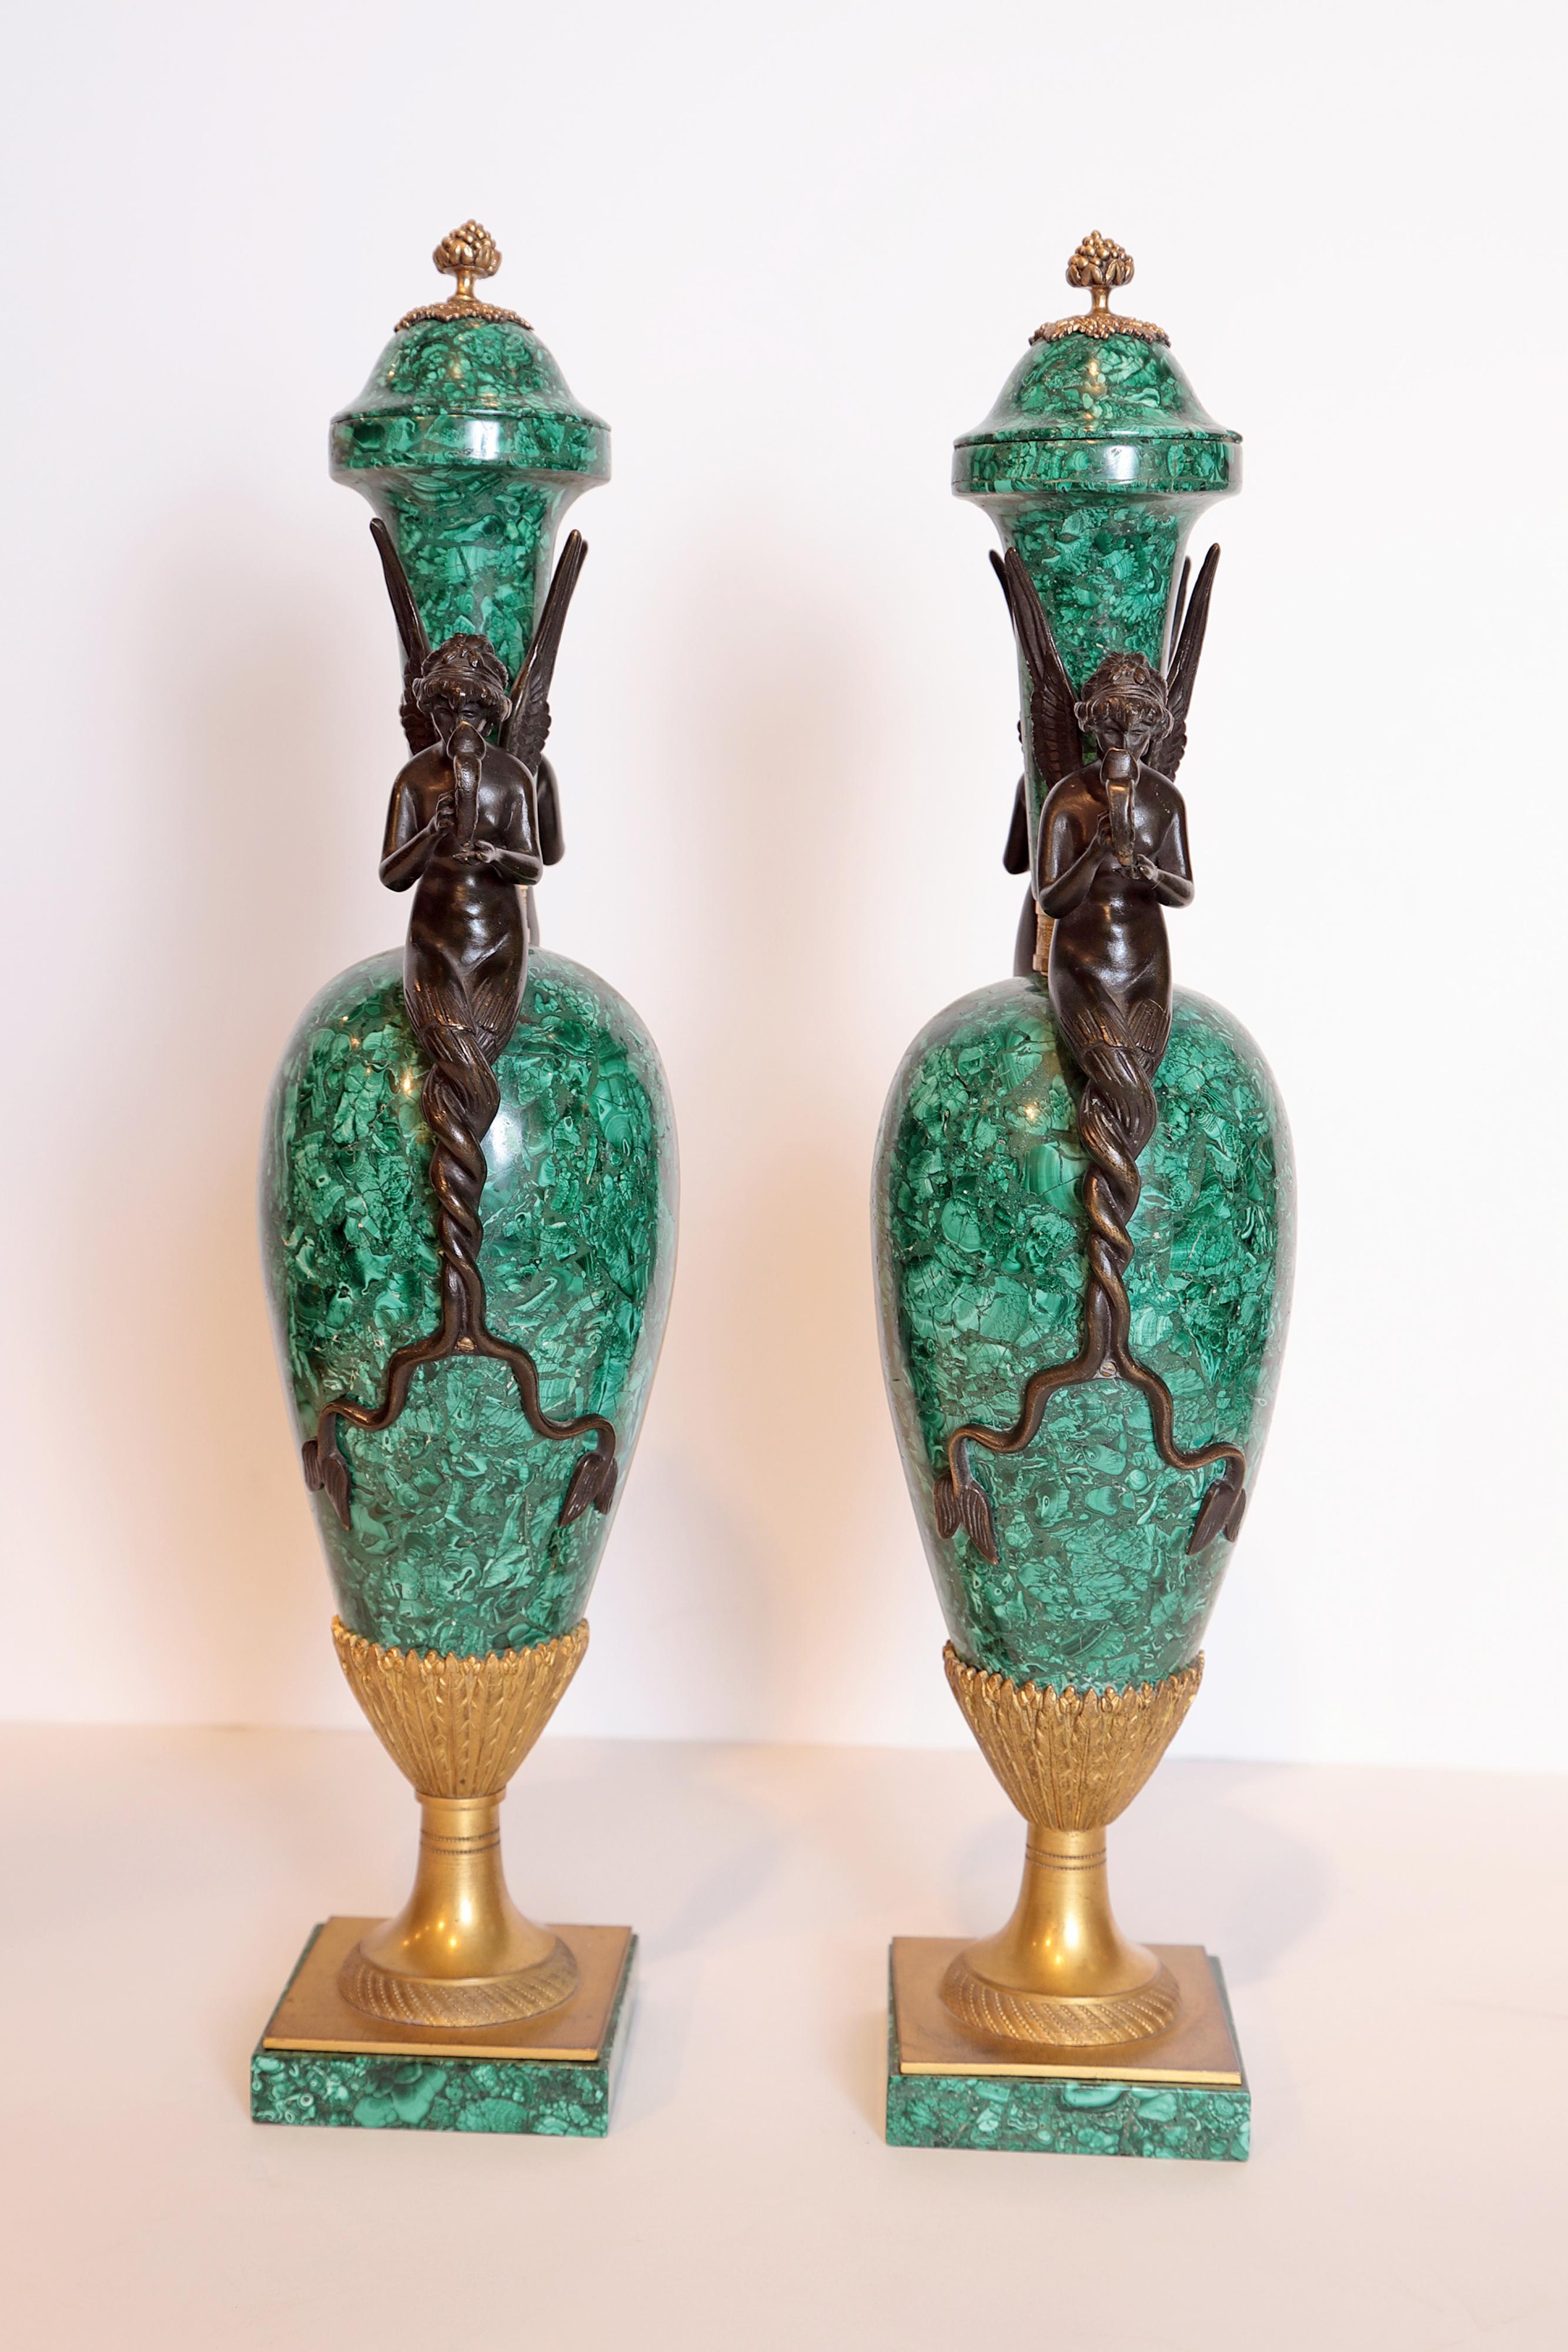 Pair of fine early 20th century malachite urns with patinated bronze water maidens on the side.